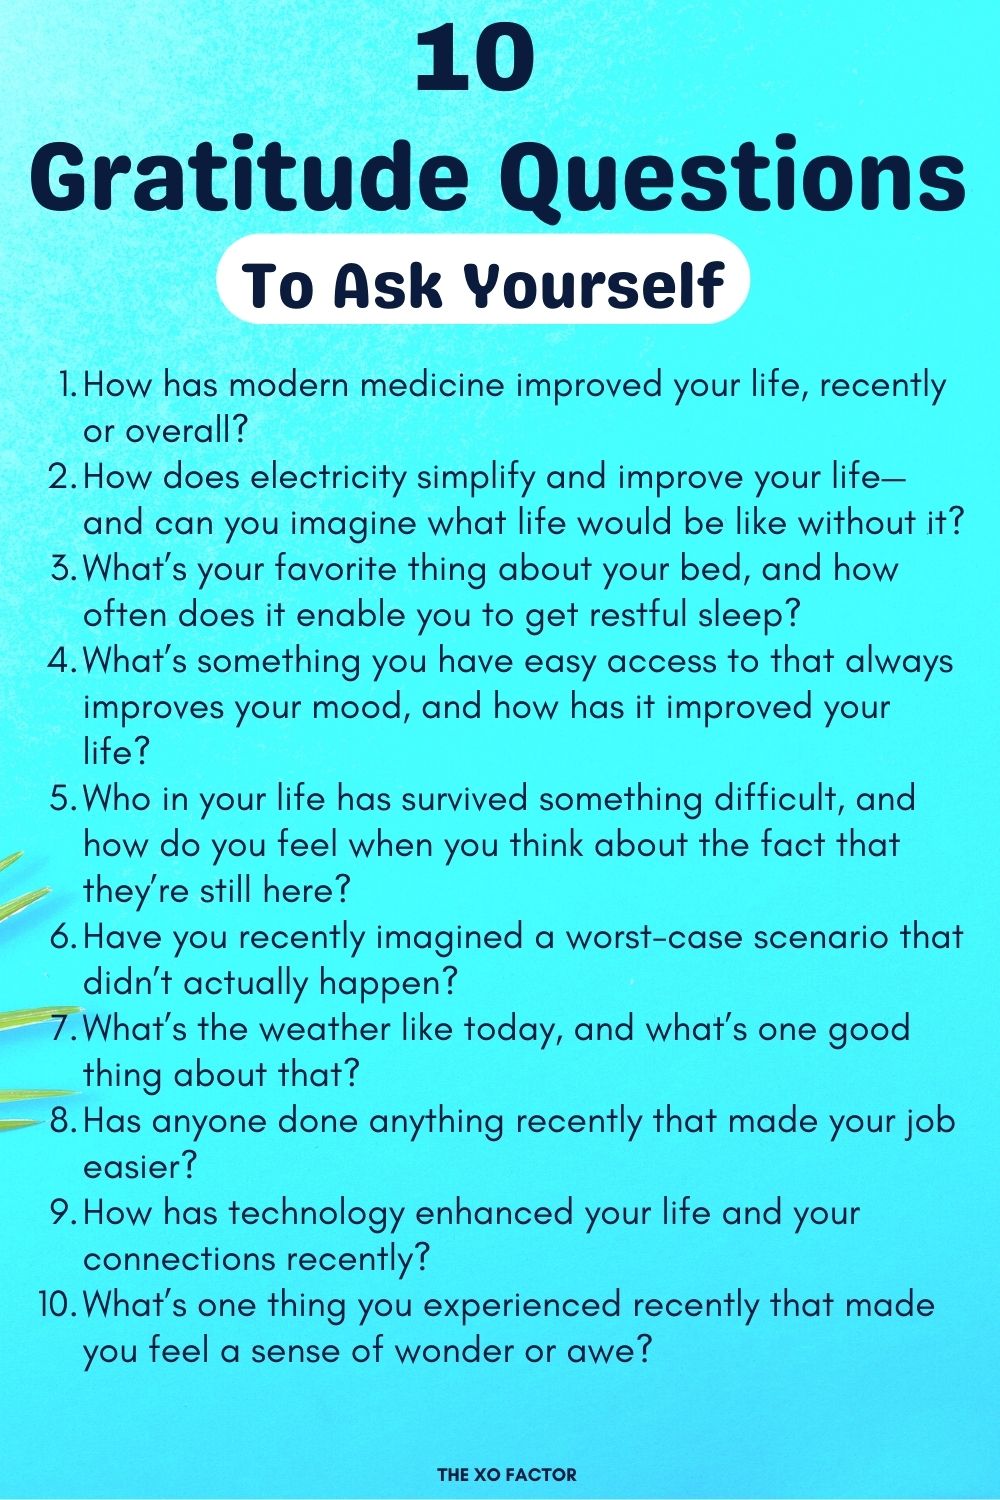 Gratitude questions to ask yourself